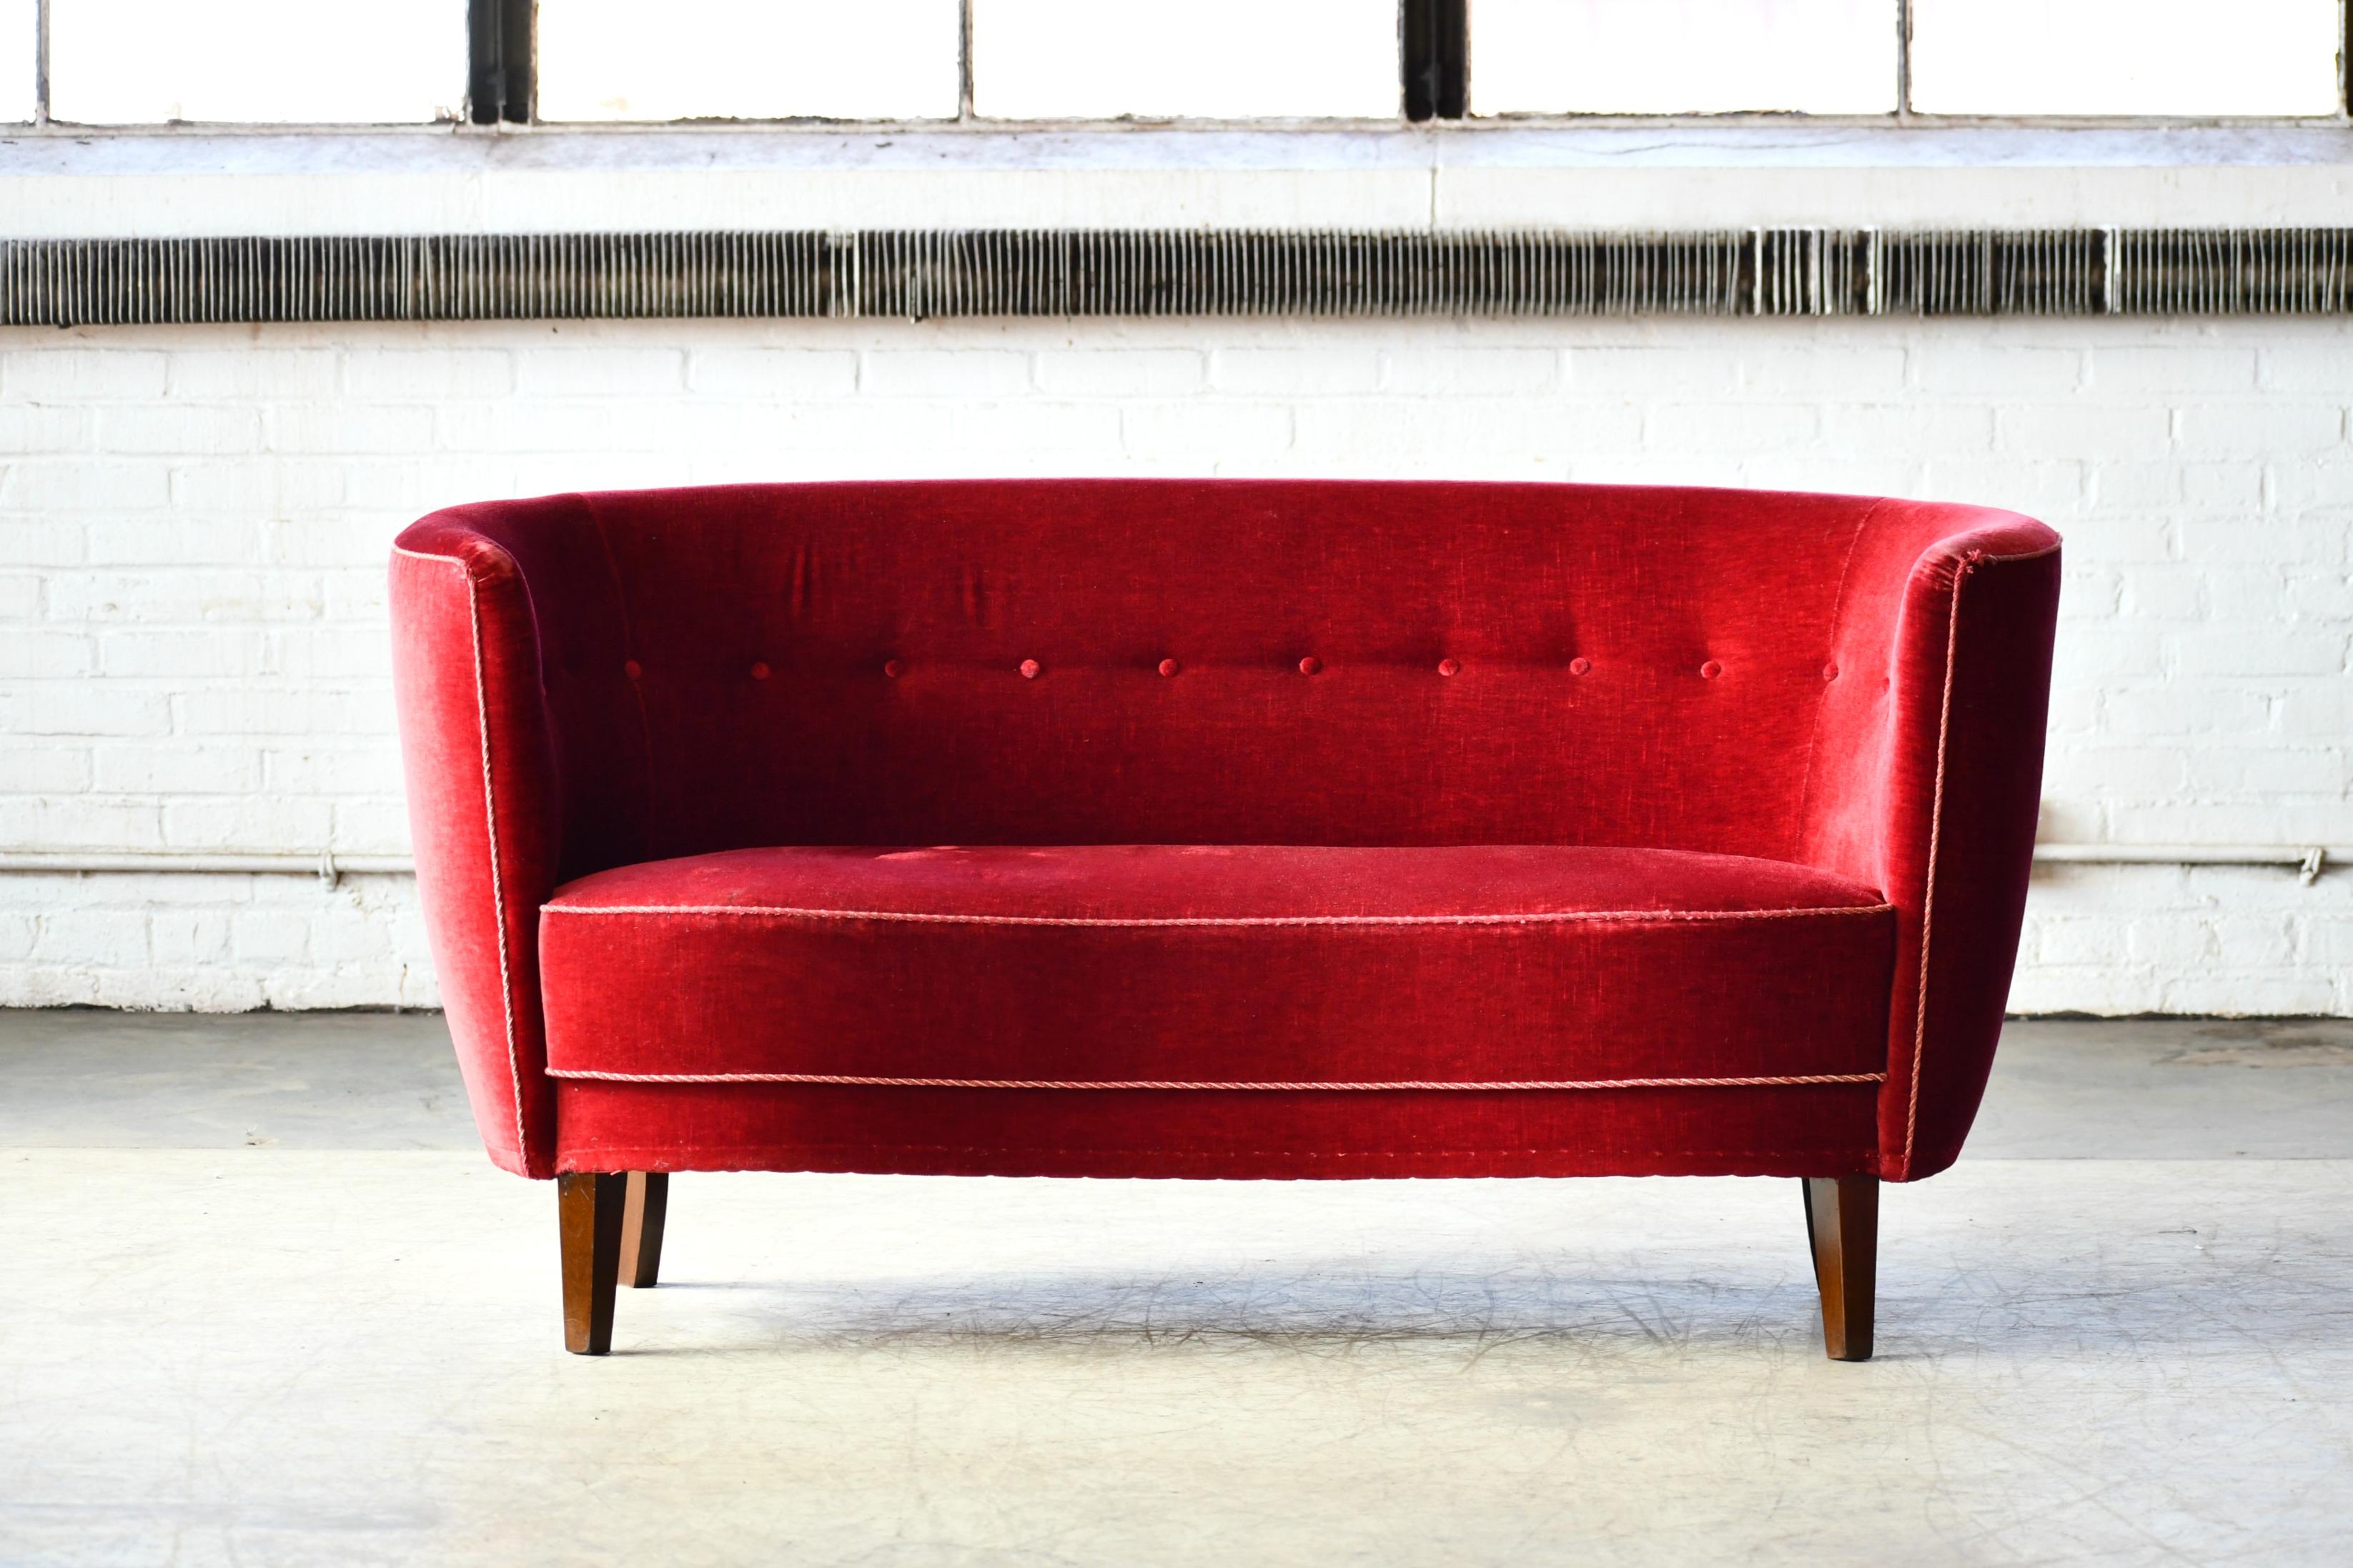 Beautiful and very elegant Danish 1940s curved two-seat sofa in red mohair wool raised on a beech frame and legs. Solid construction with springs in the seat and the backrest for support and cushioning. The sofa was re-upholstered in recent years